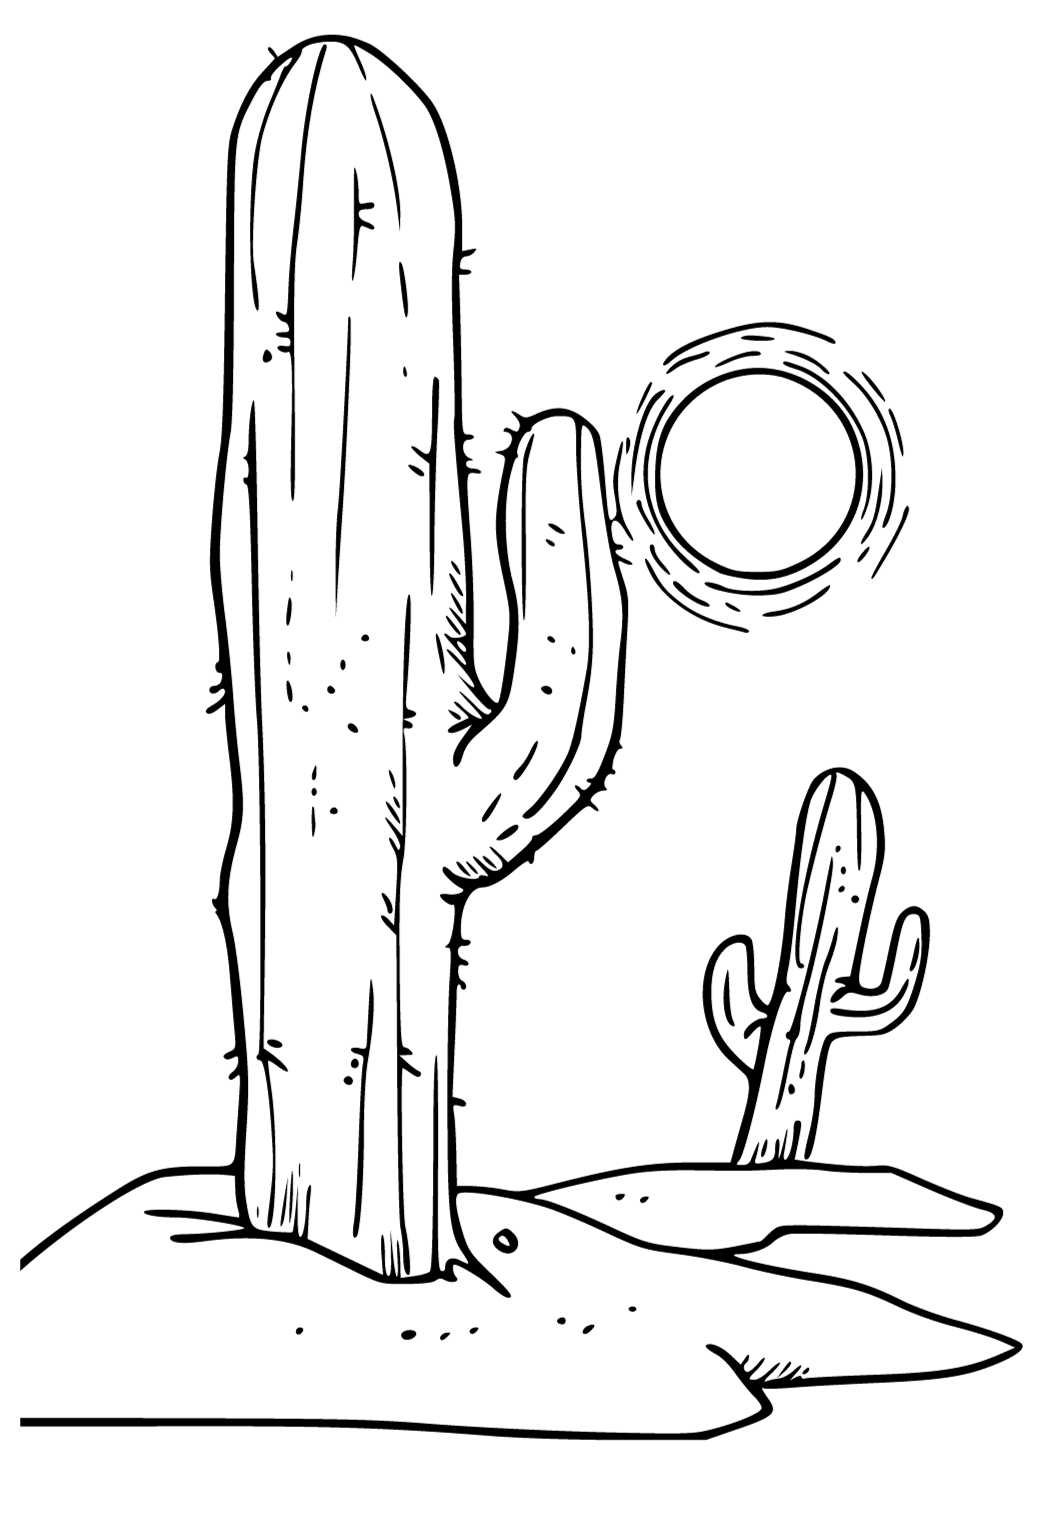 Free printable desert cactus coloring page for adults and kids